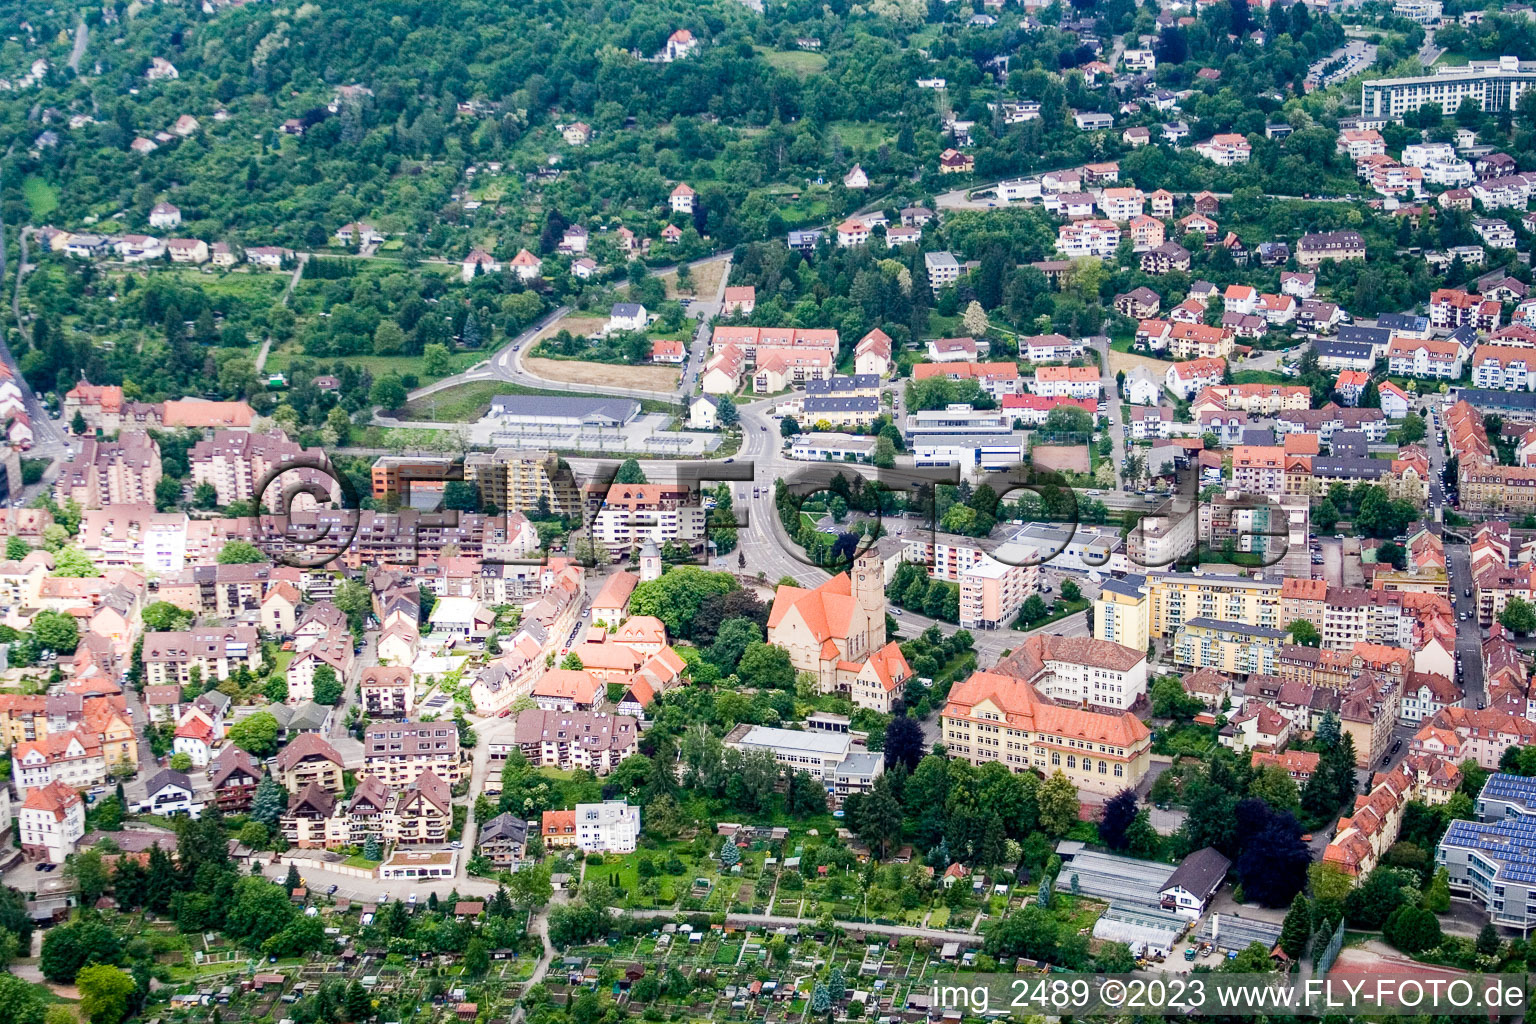 Drone image of Pforzheim in the state Baden-Wuerttemberg, Germany